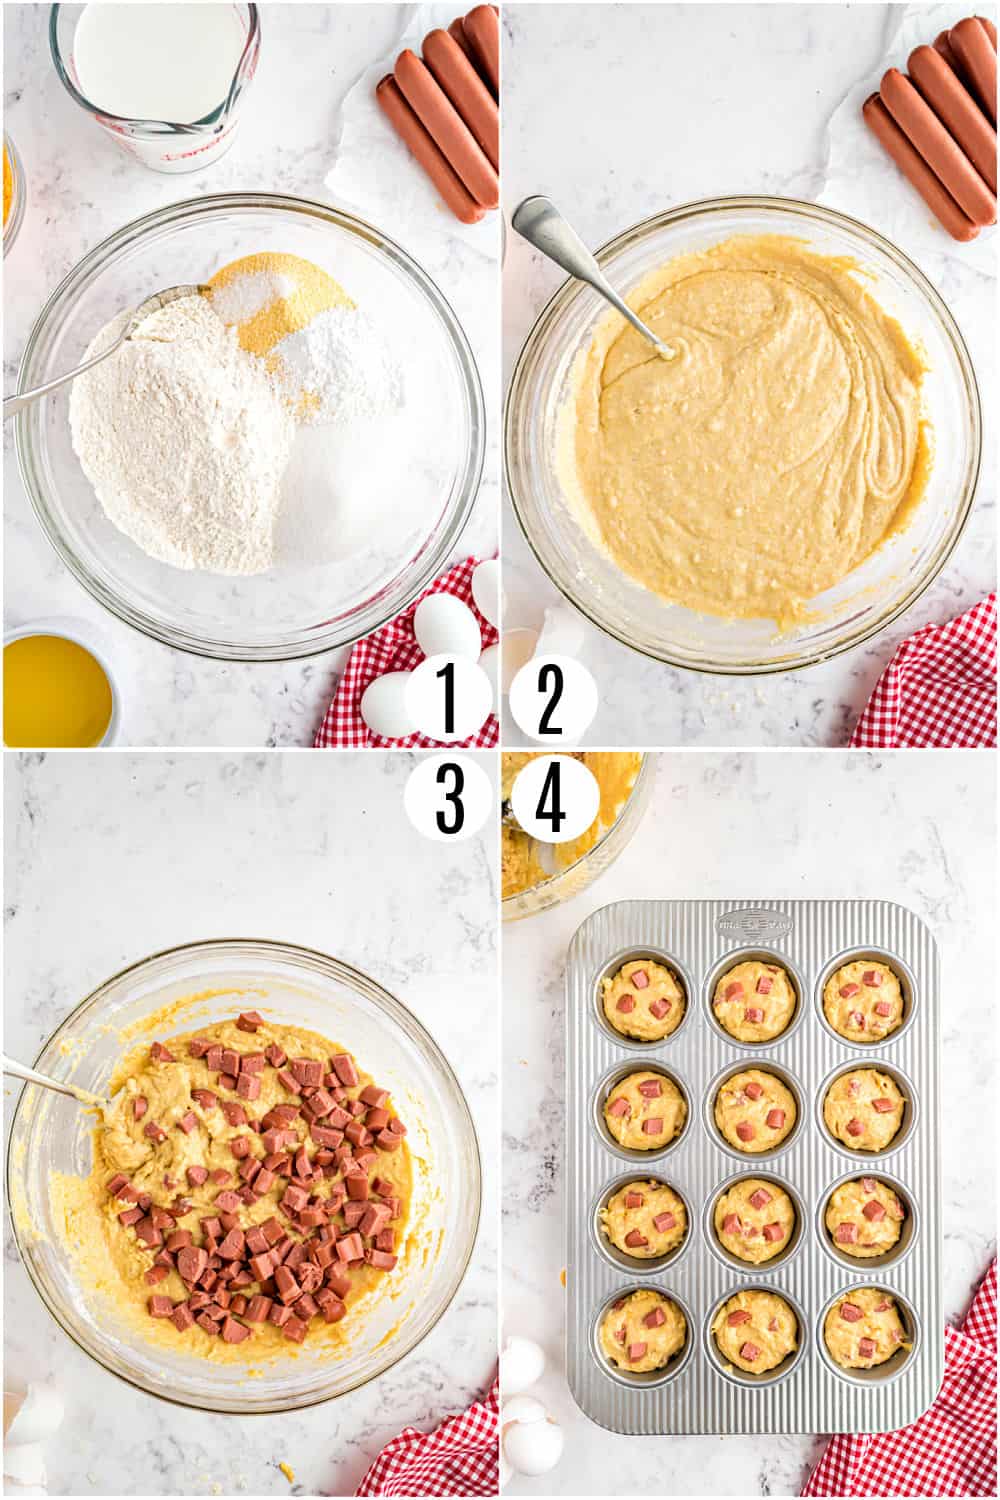 Step by step photos showing how to make corn dog muffins.